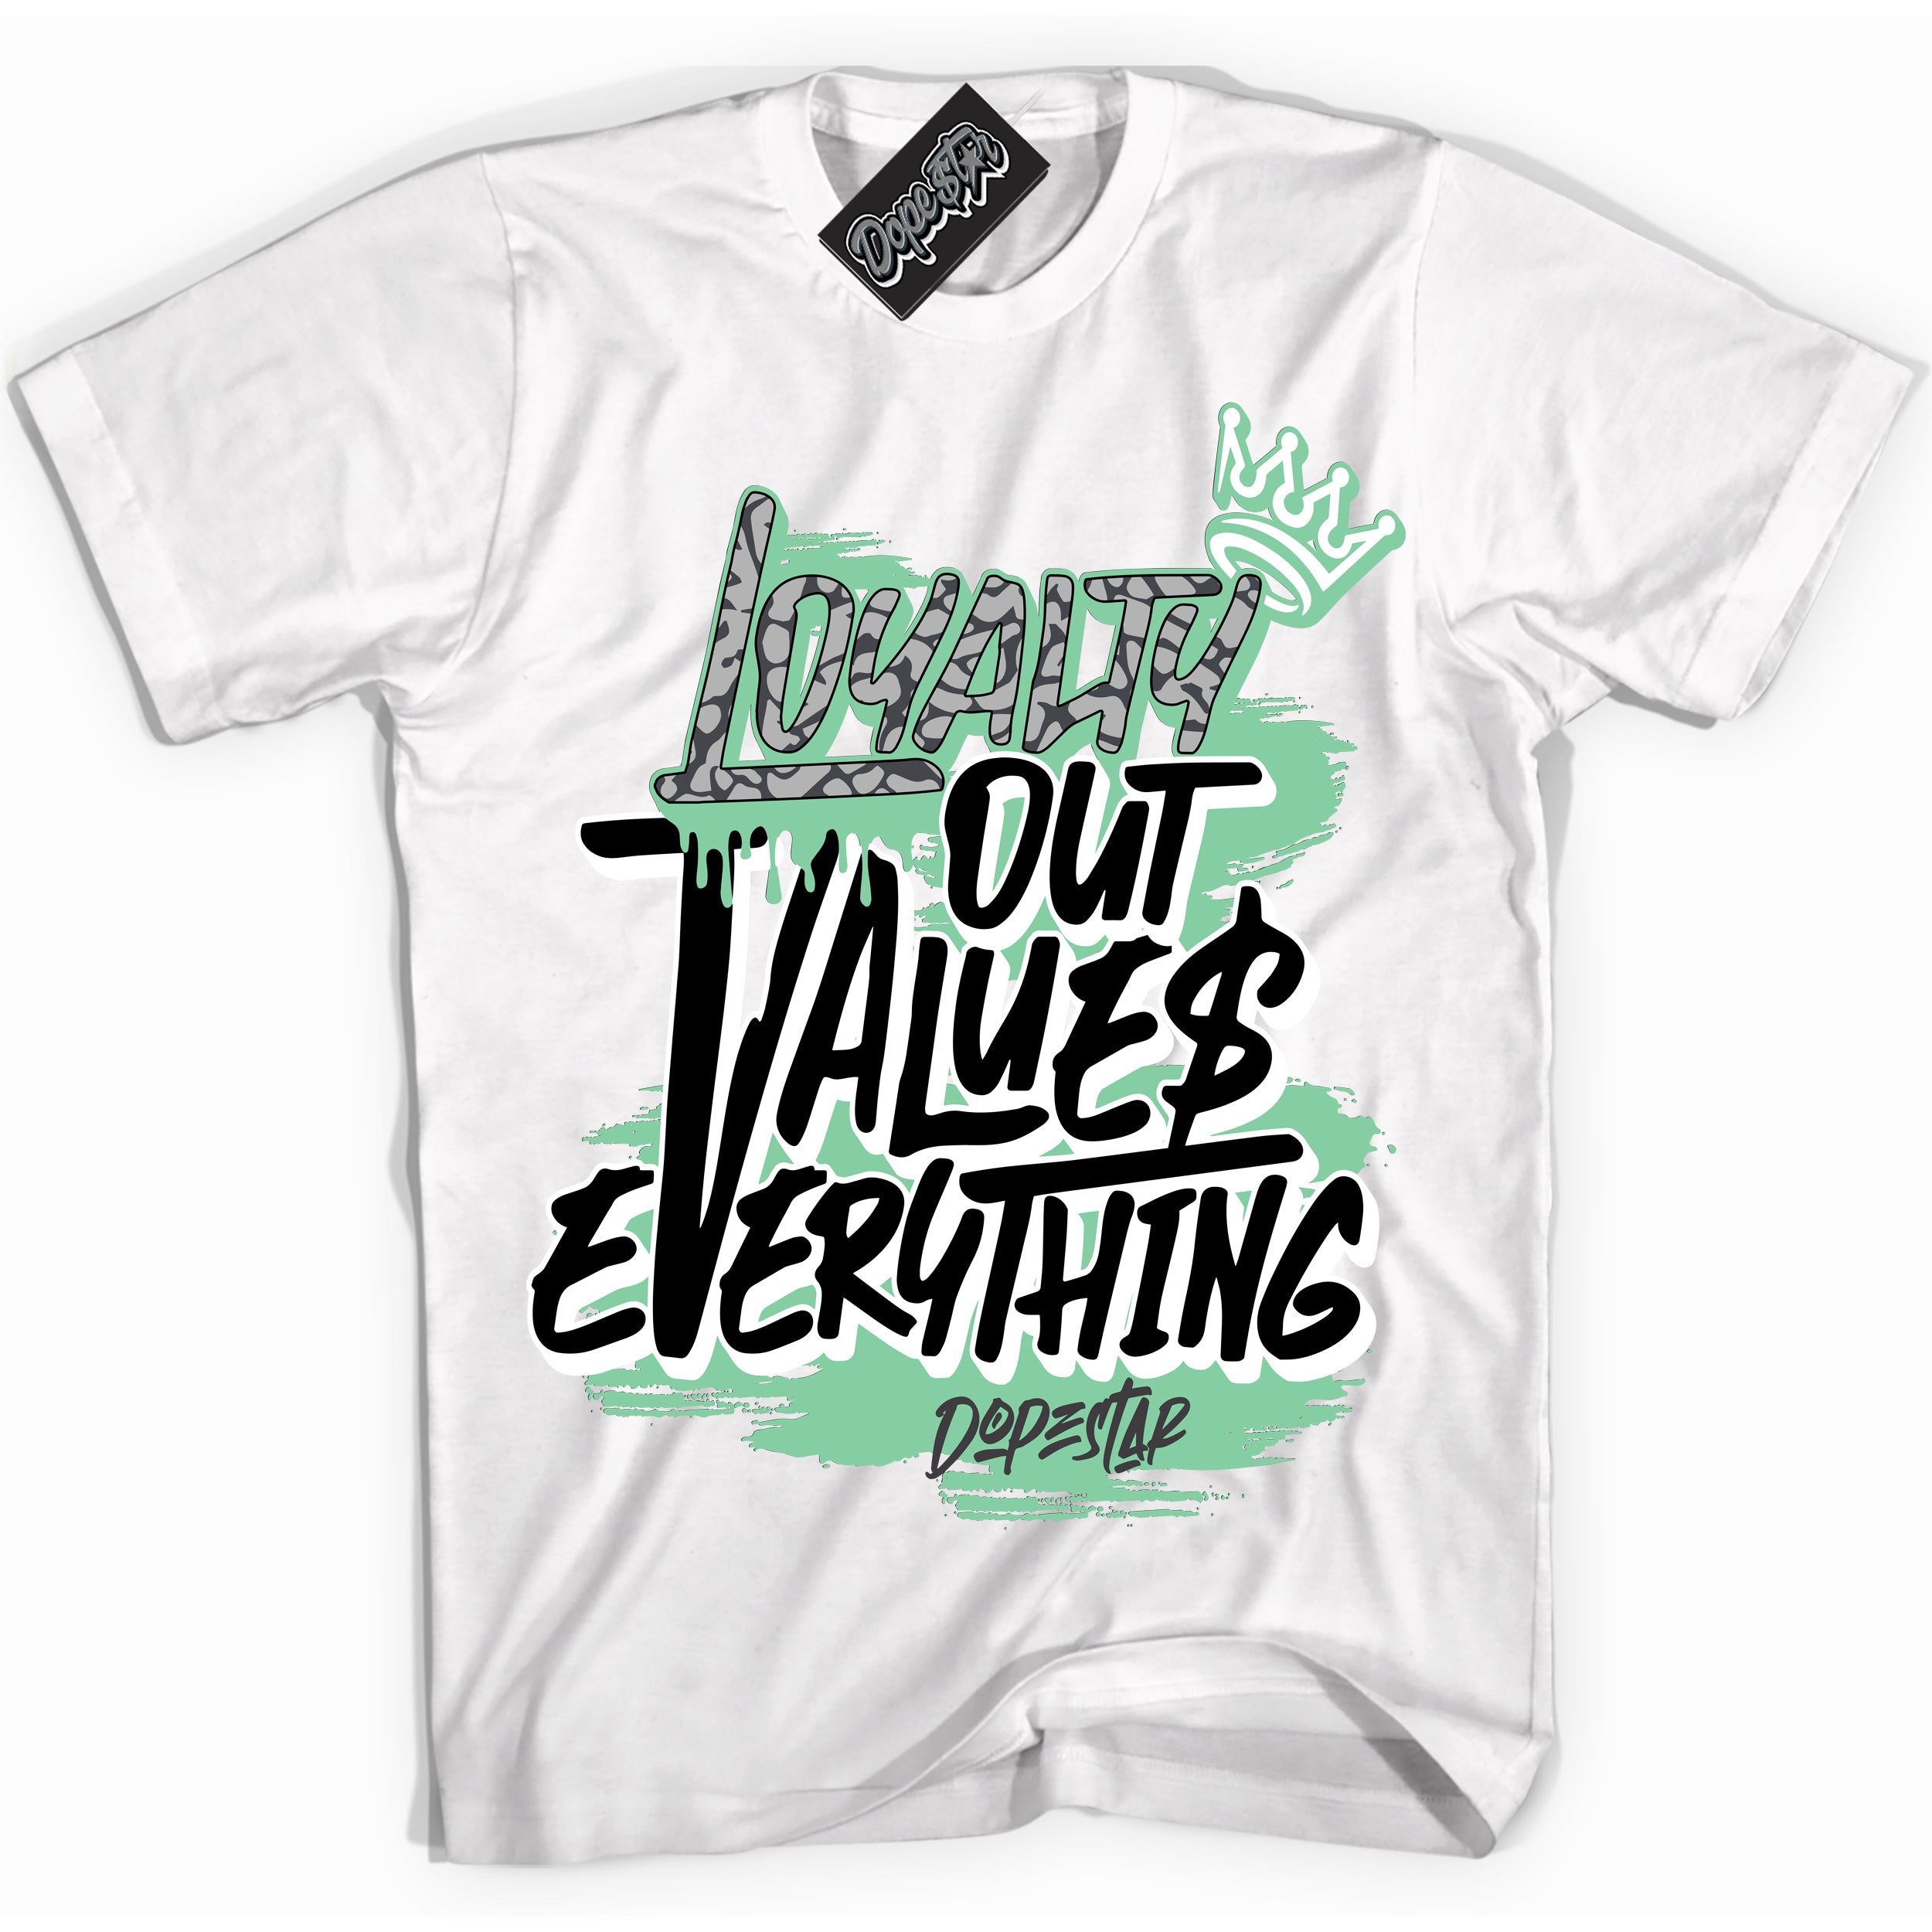 Cool White Shirt with “ Loyalty Out Values Everything” design that perfectly matches Green Glow 3s Sneakers.